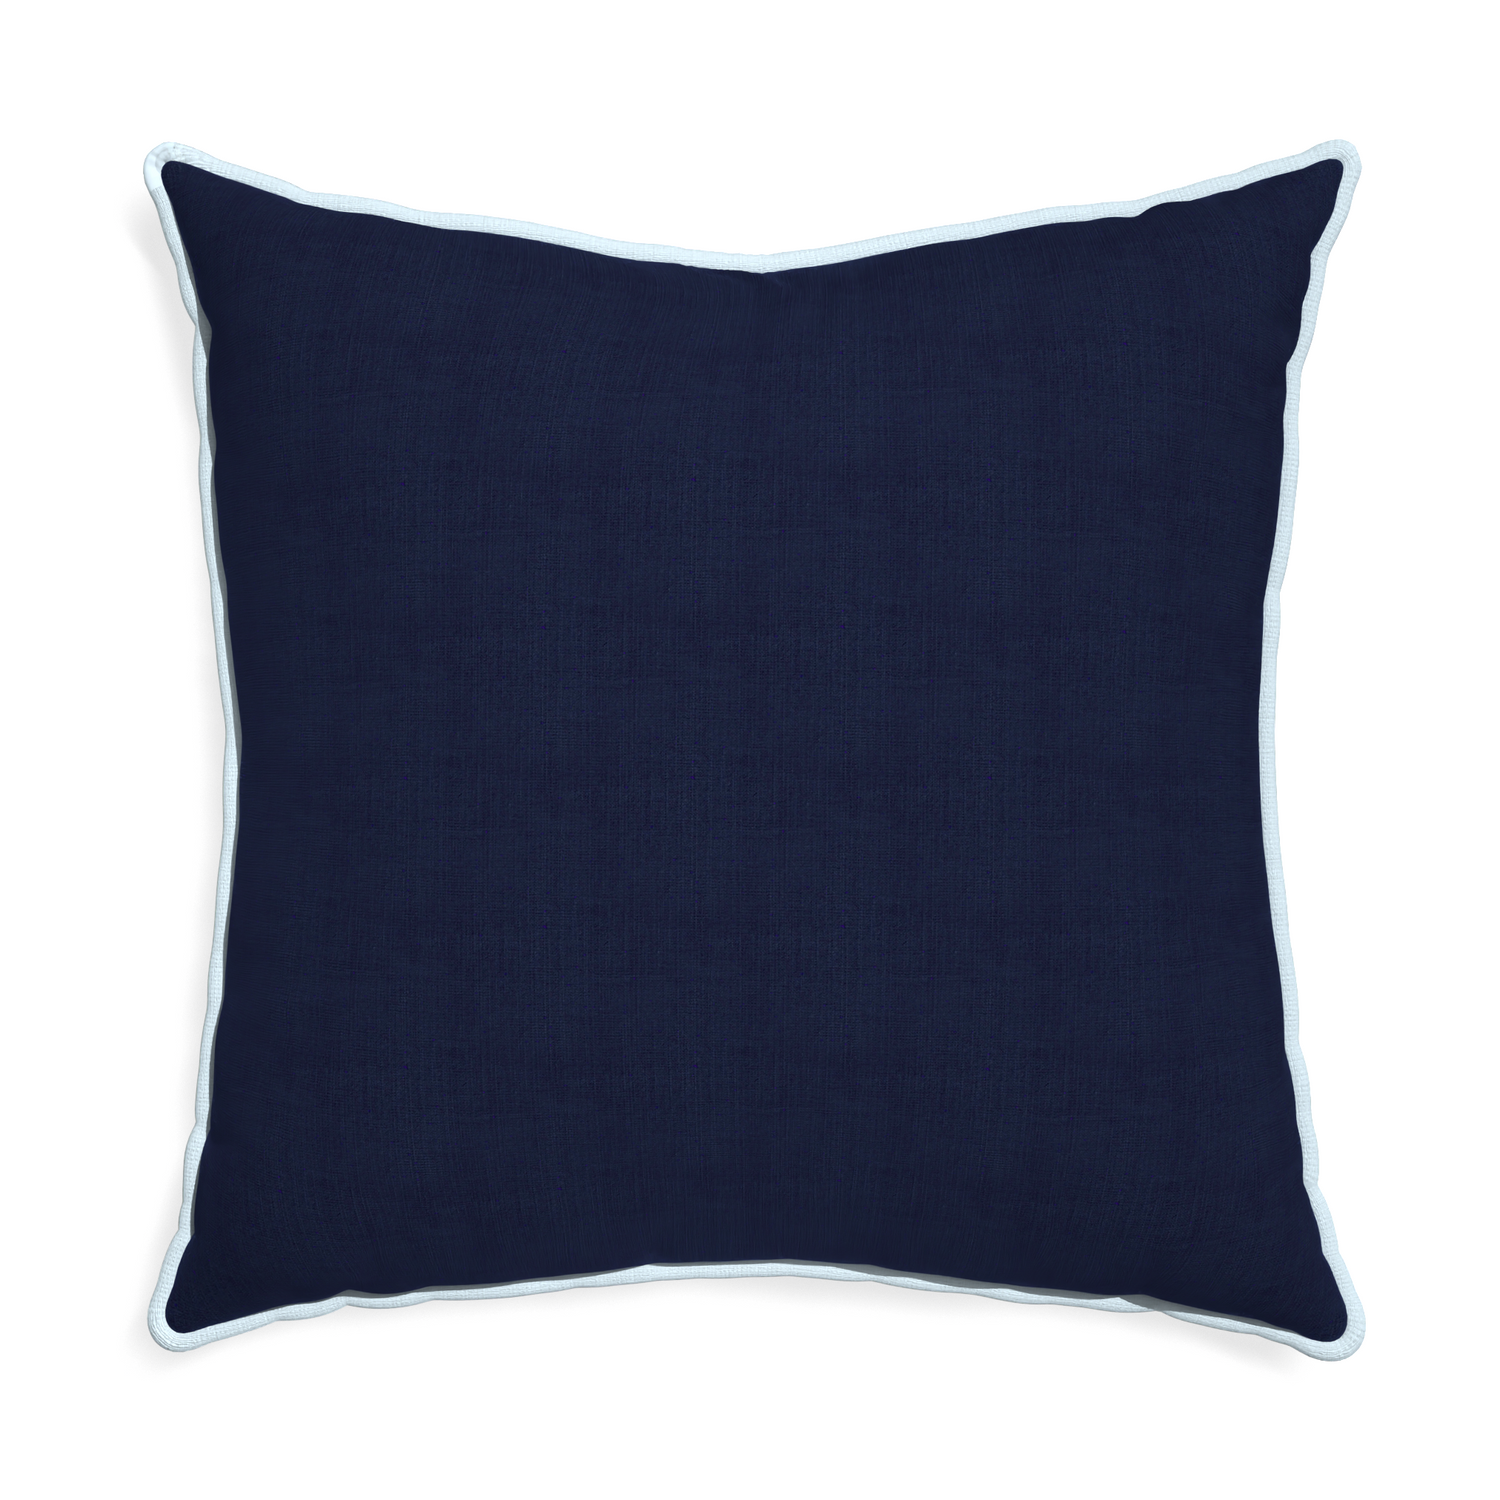 Euro-sham midnight custom pillow with powder piping on white background